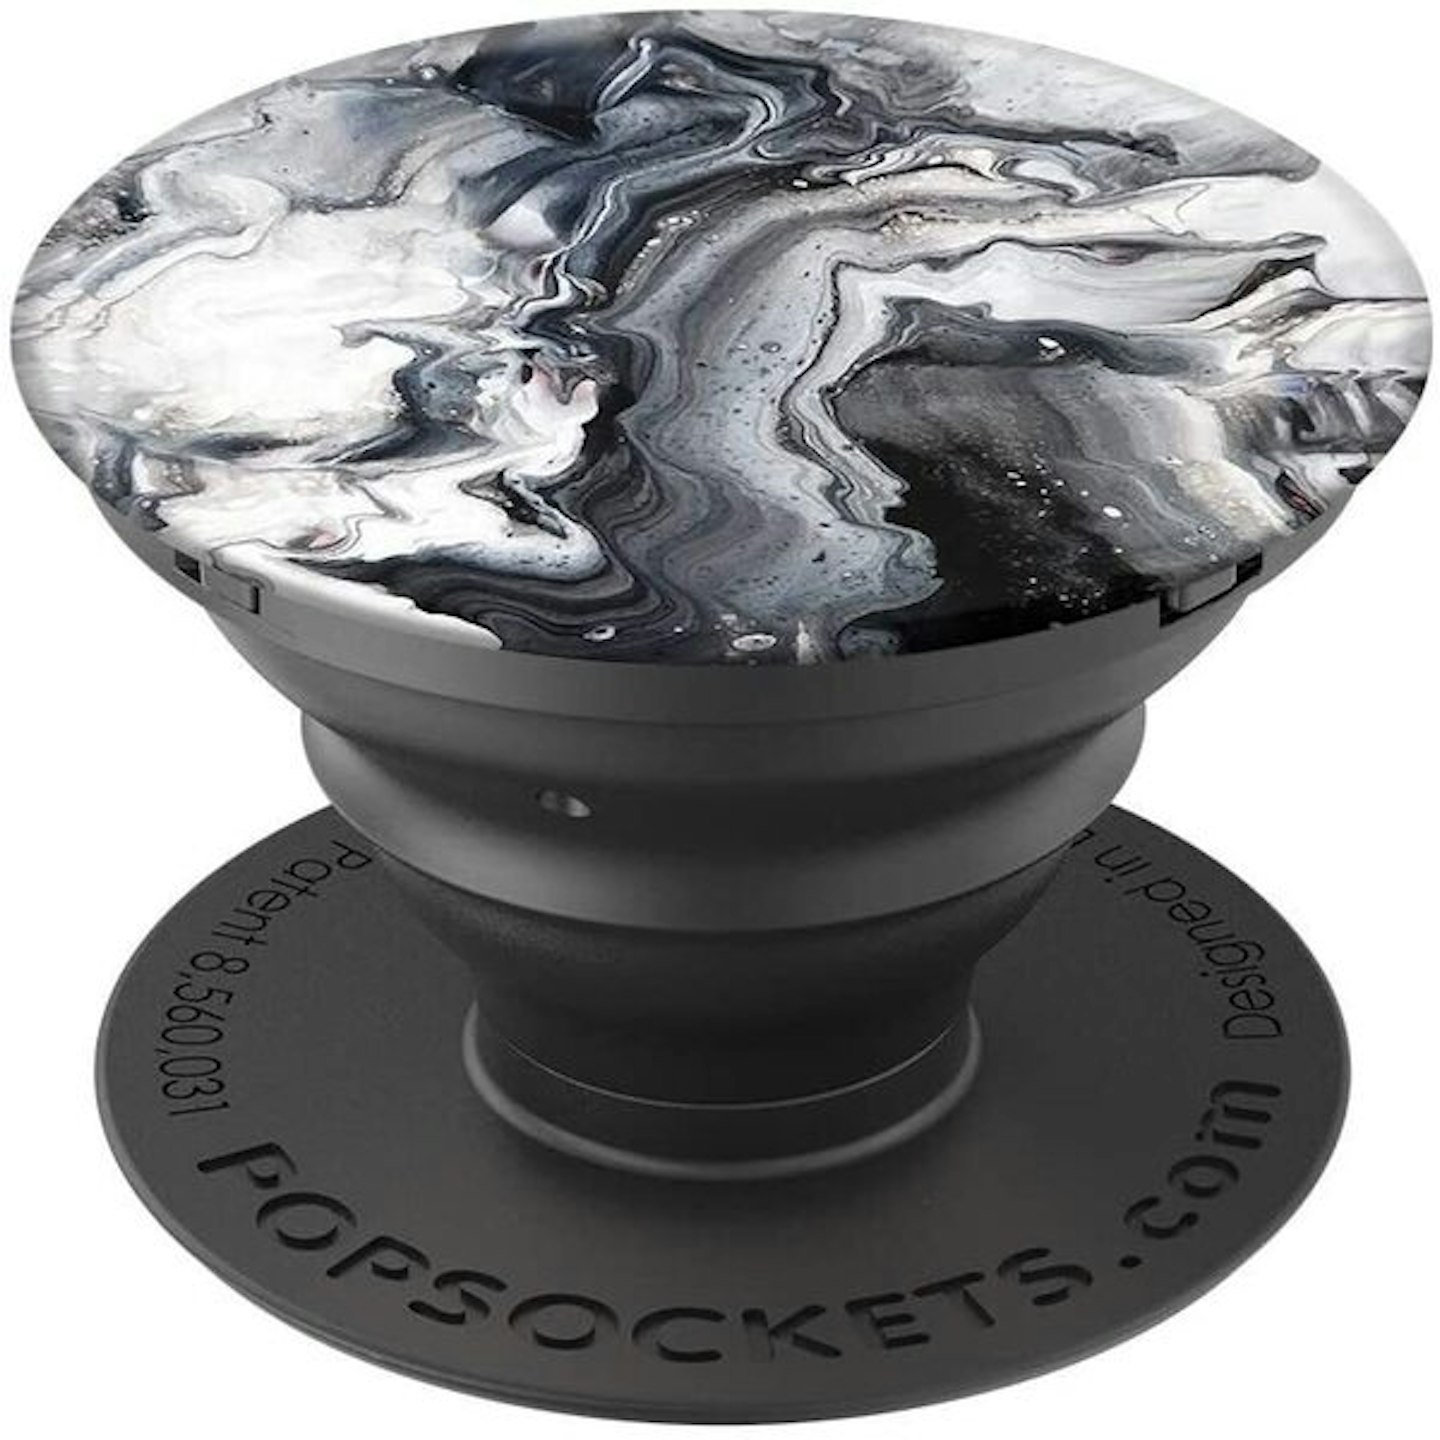 Ghost marble popsocket